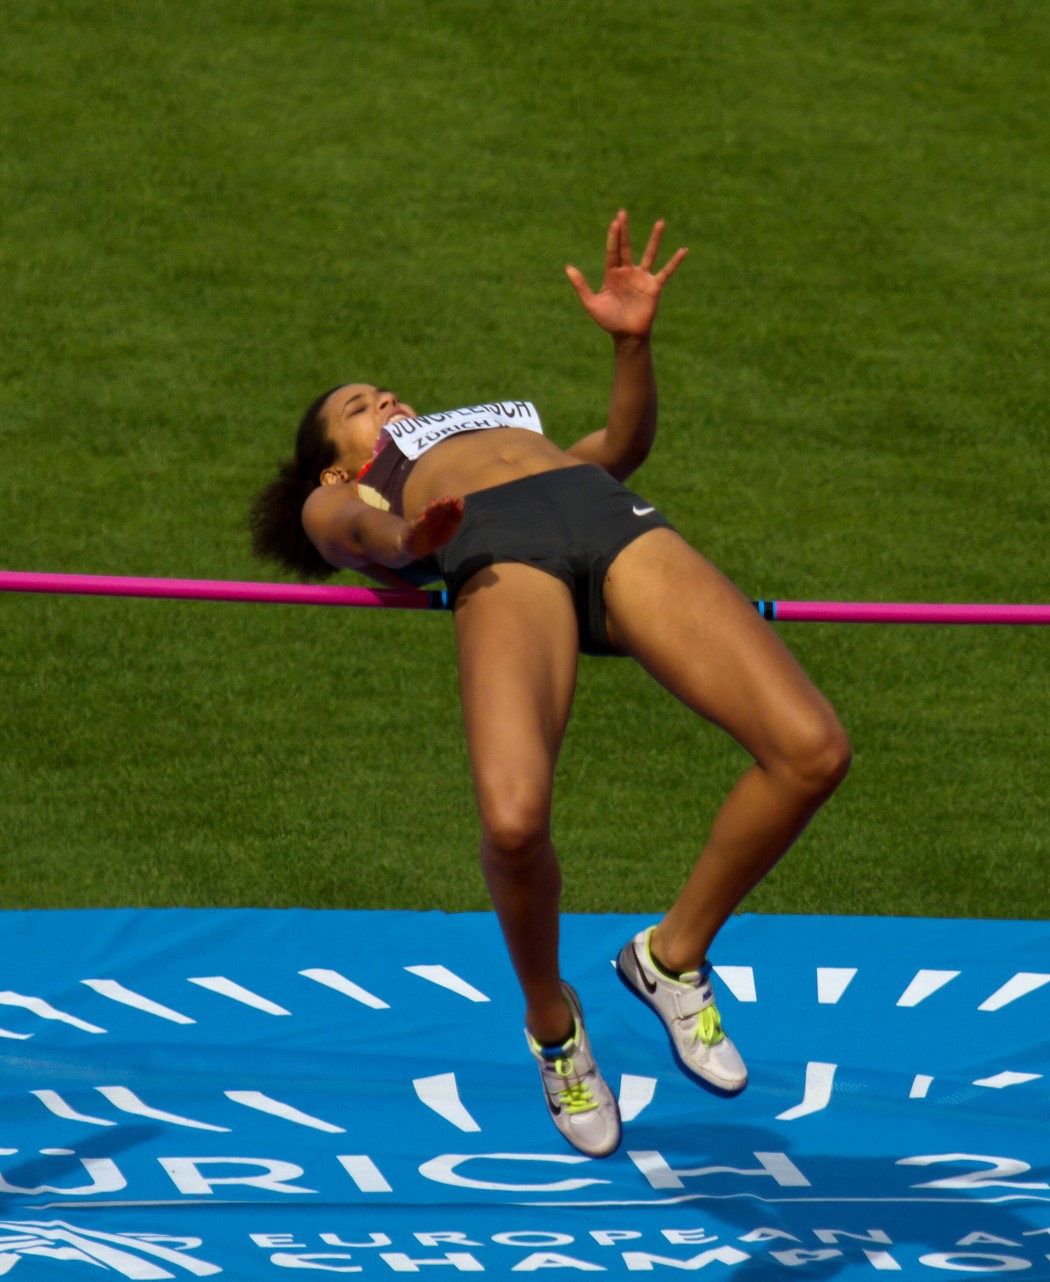 a female athlete wearing black has her hands in the air